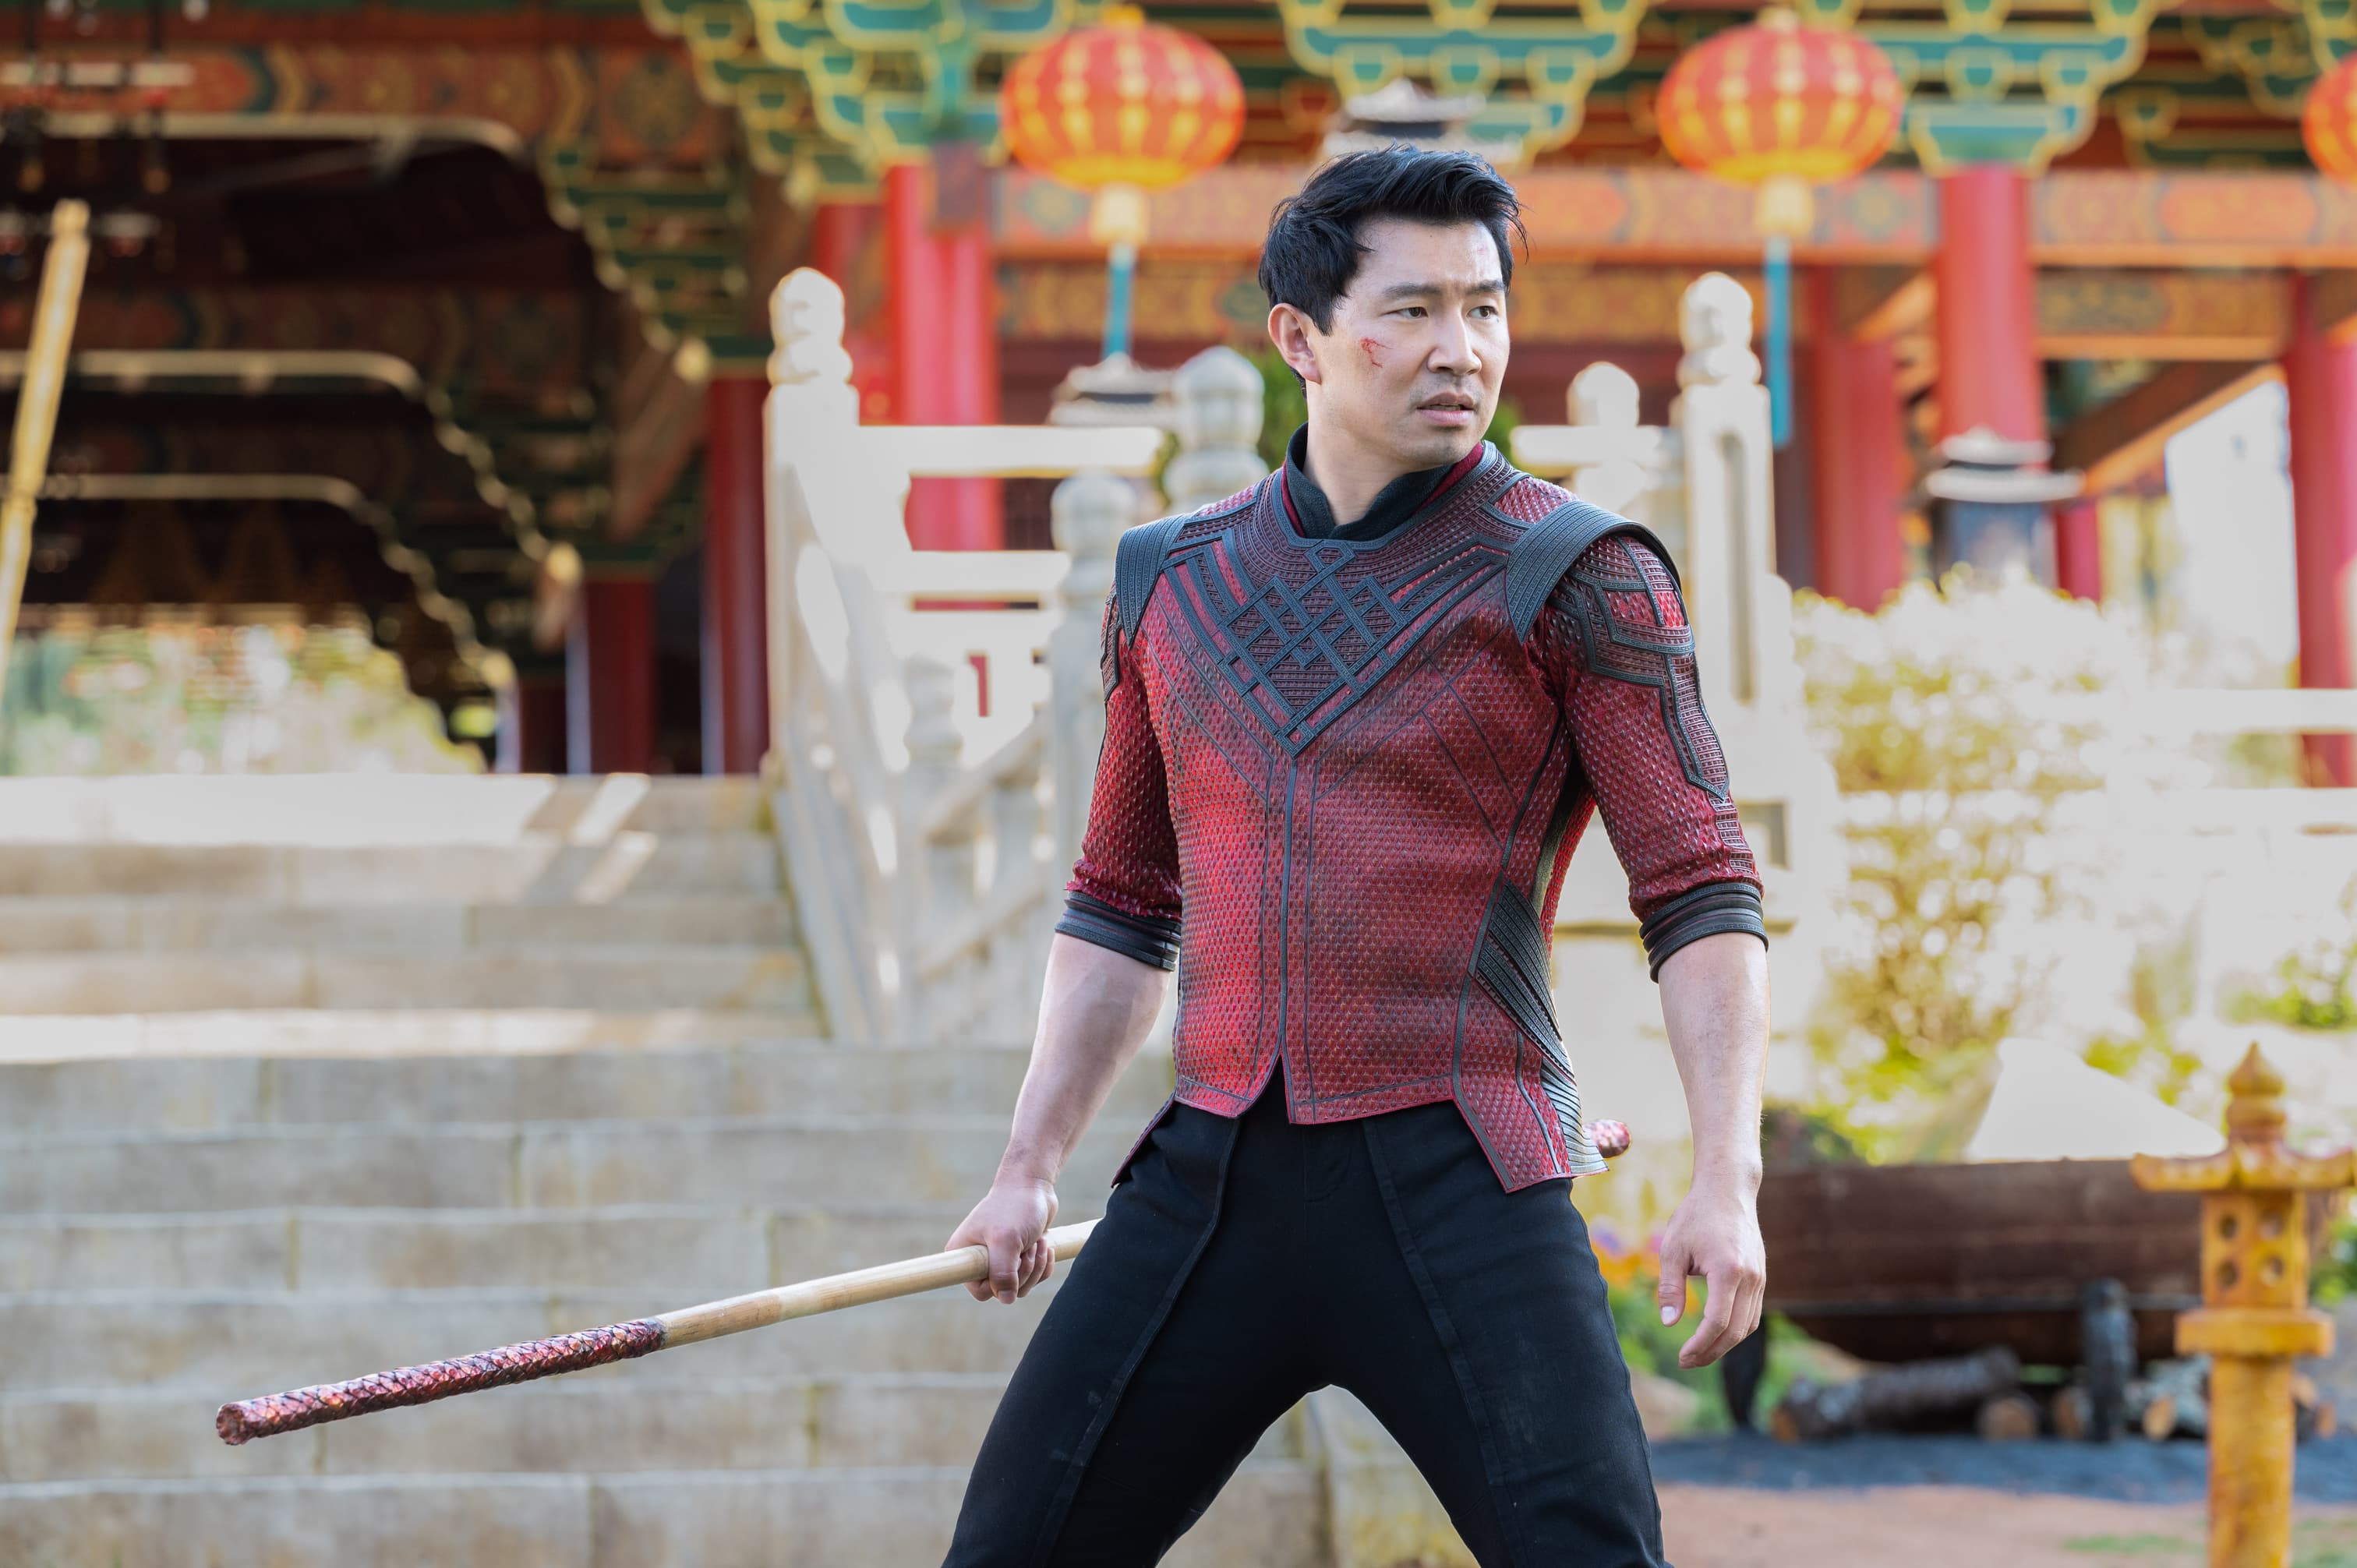 First Look at 'Shang-Chi and the Legend of the Ten Rings' 